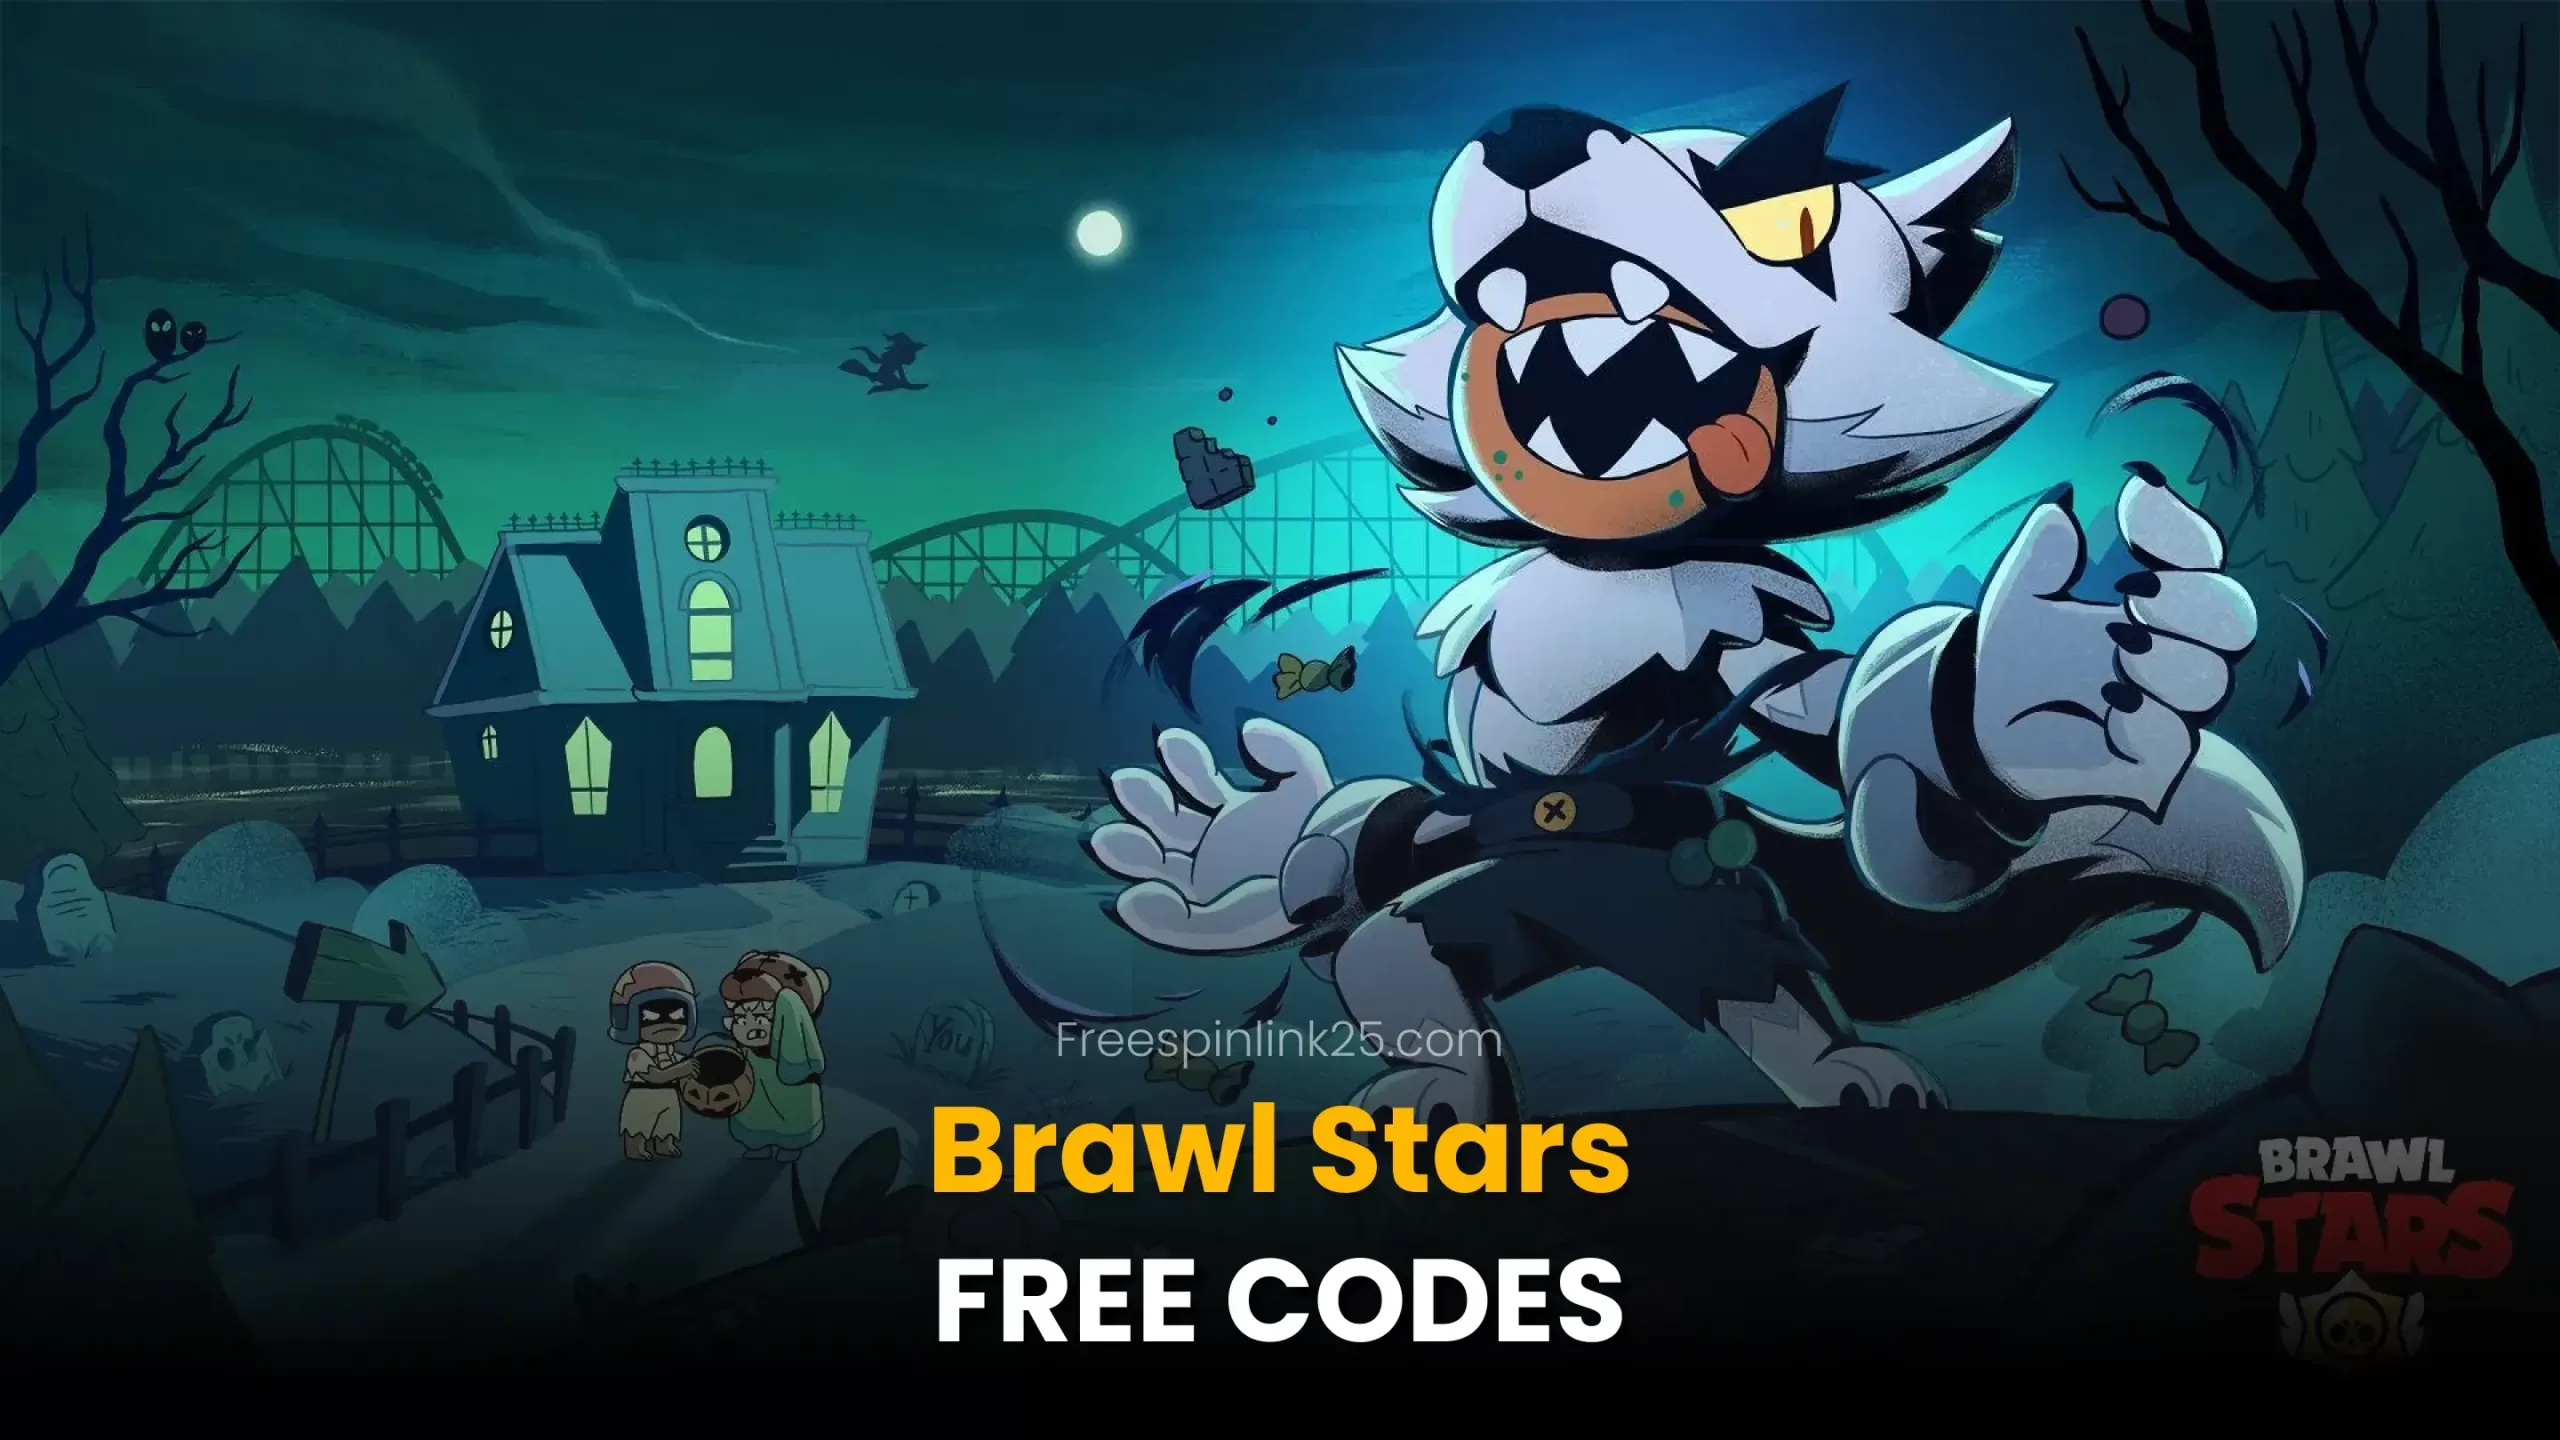 When Are We Getting Edgar in Brawl Stars? - Playbite